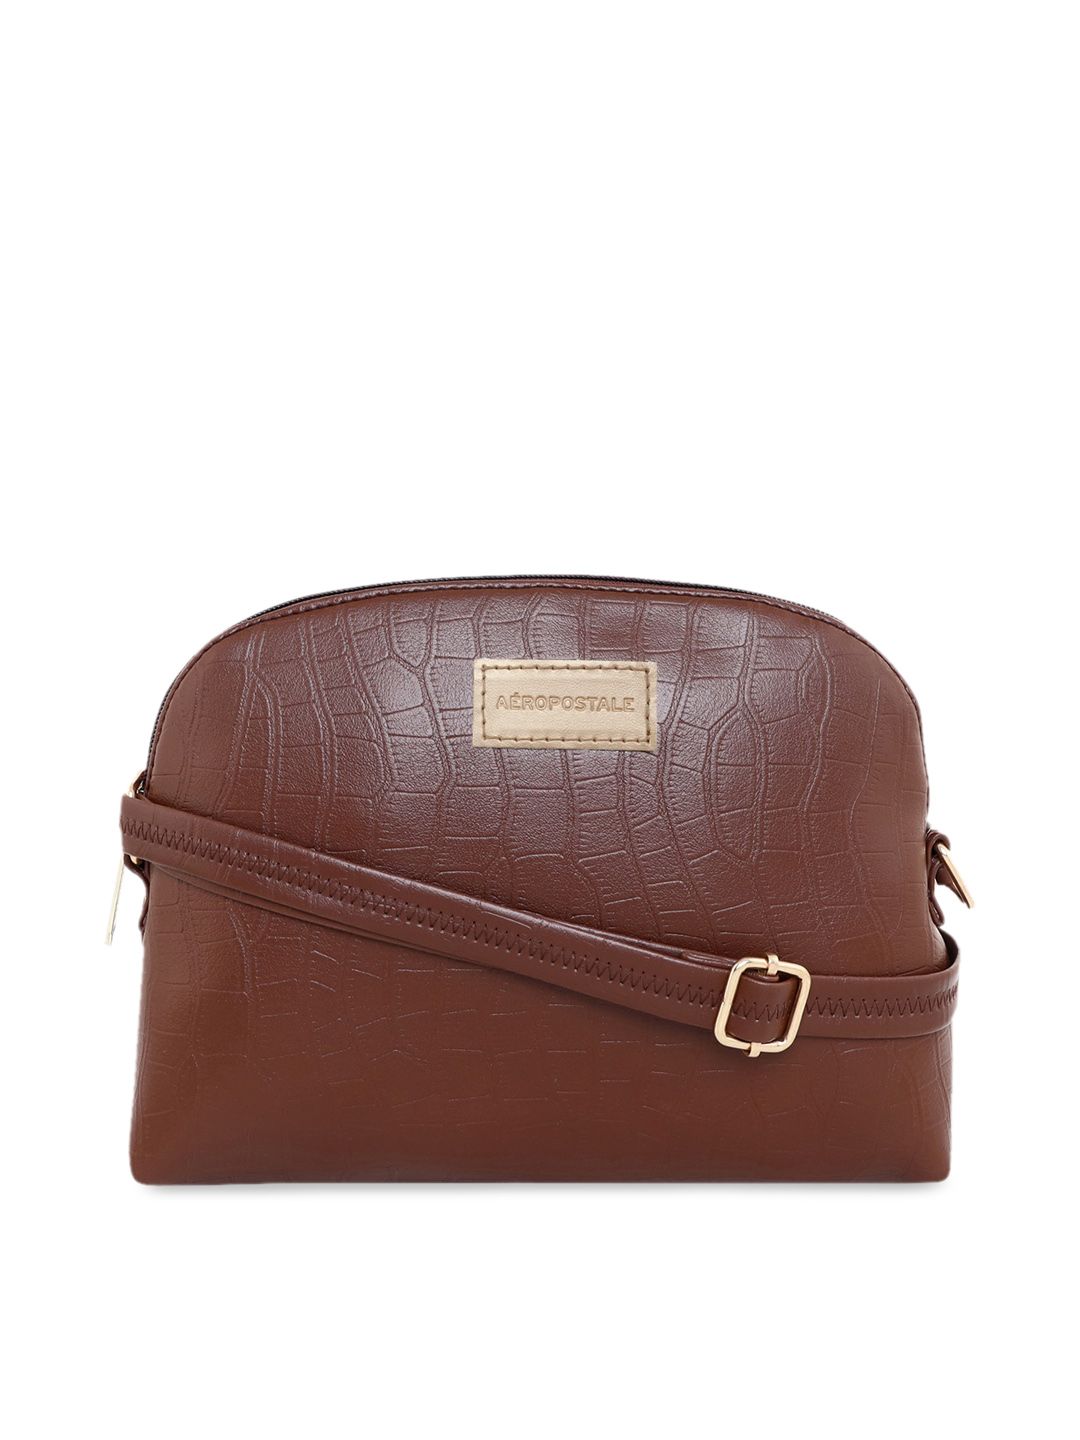 Aeropostale Brown Animal Textured PU Structured Sling Bag Price in India